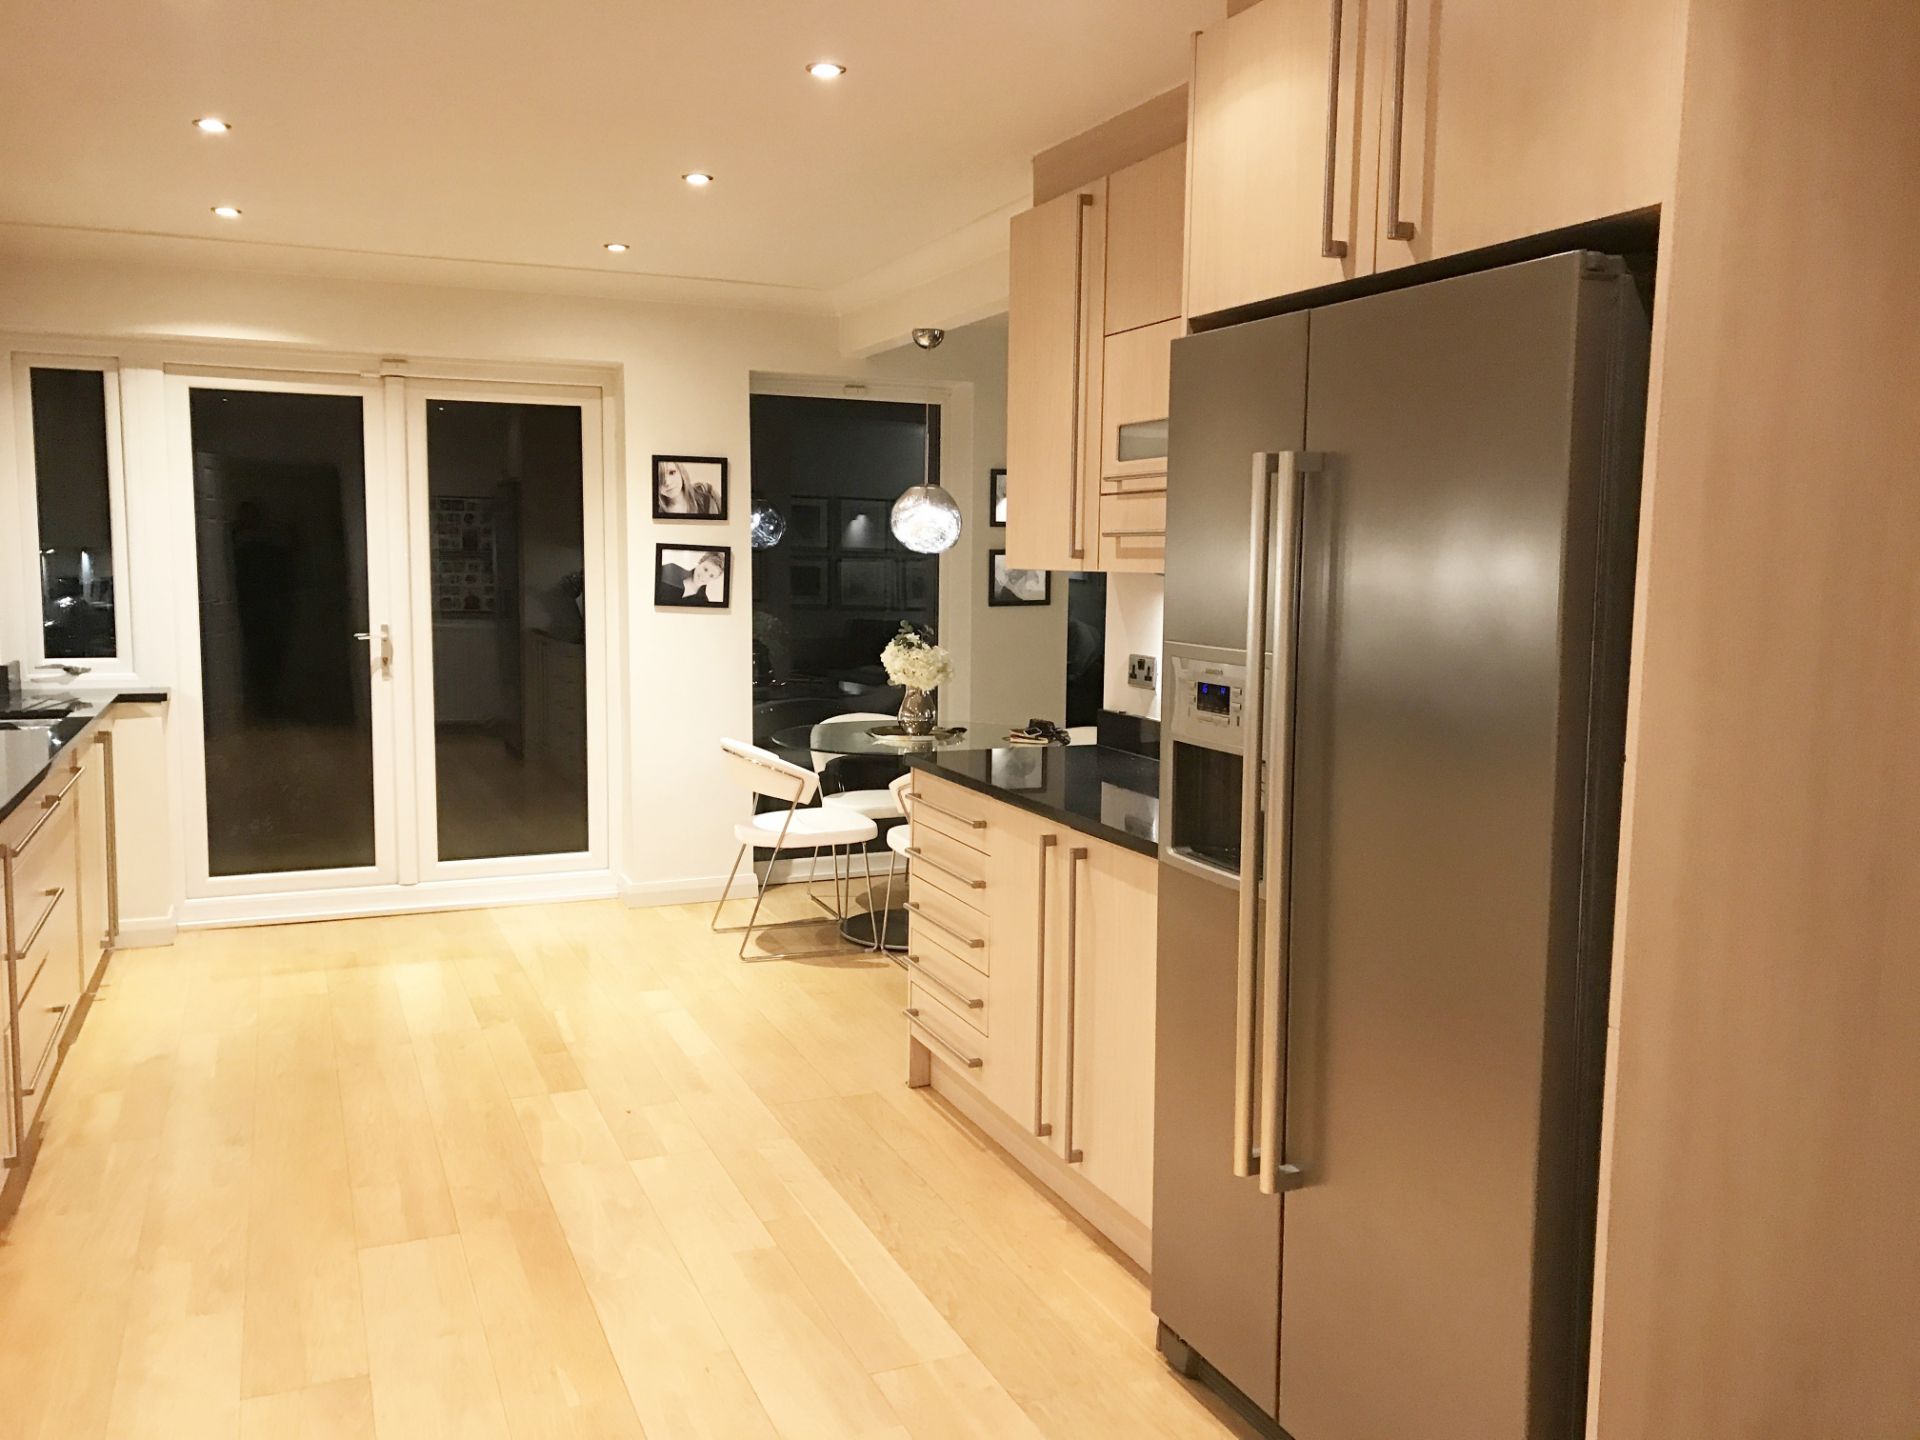 1 x Fitted Kitchen Featuring Birch Soft Close Doors, Black Granite Worktops and Zanussi Appliances - - Image 29 of 51